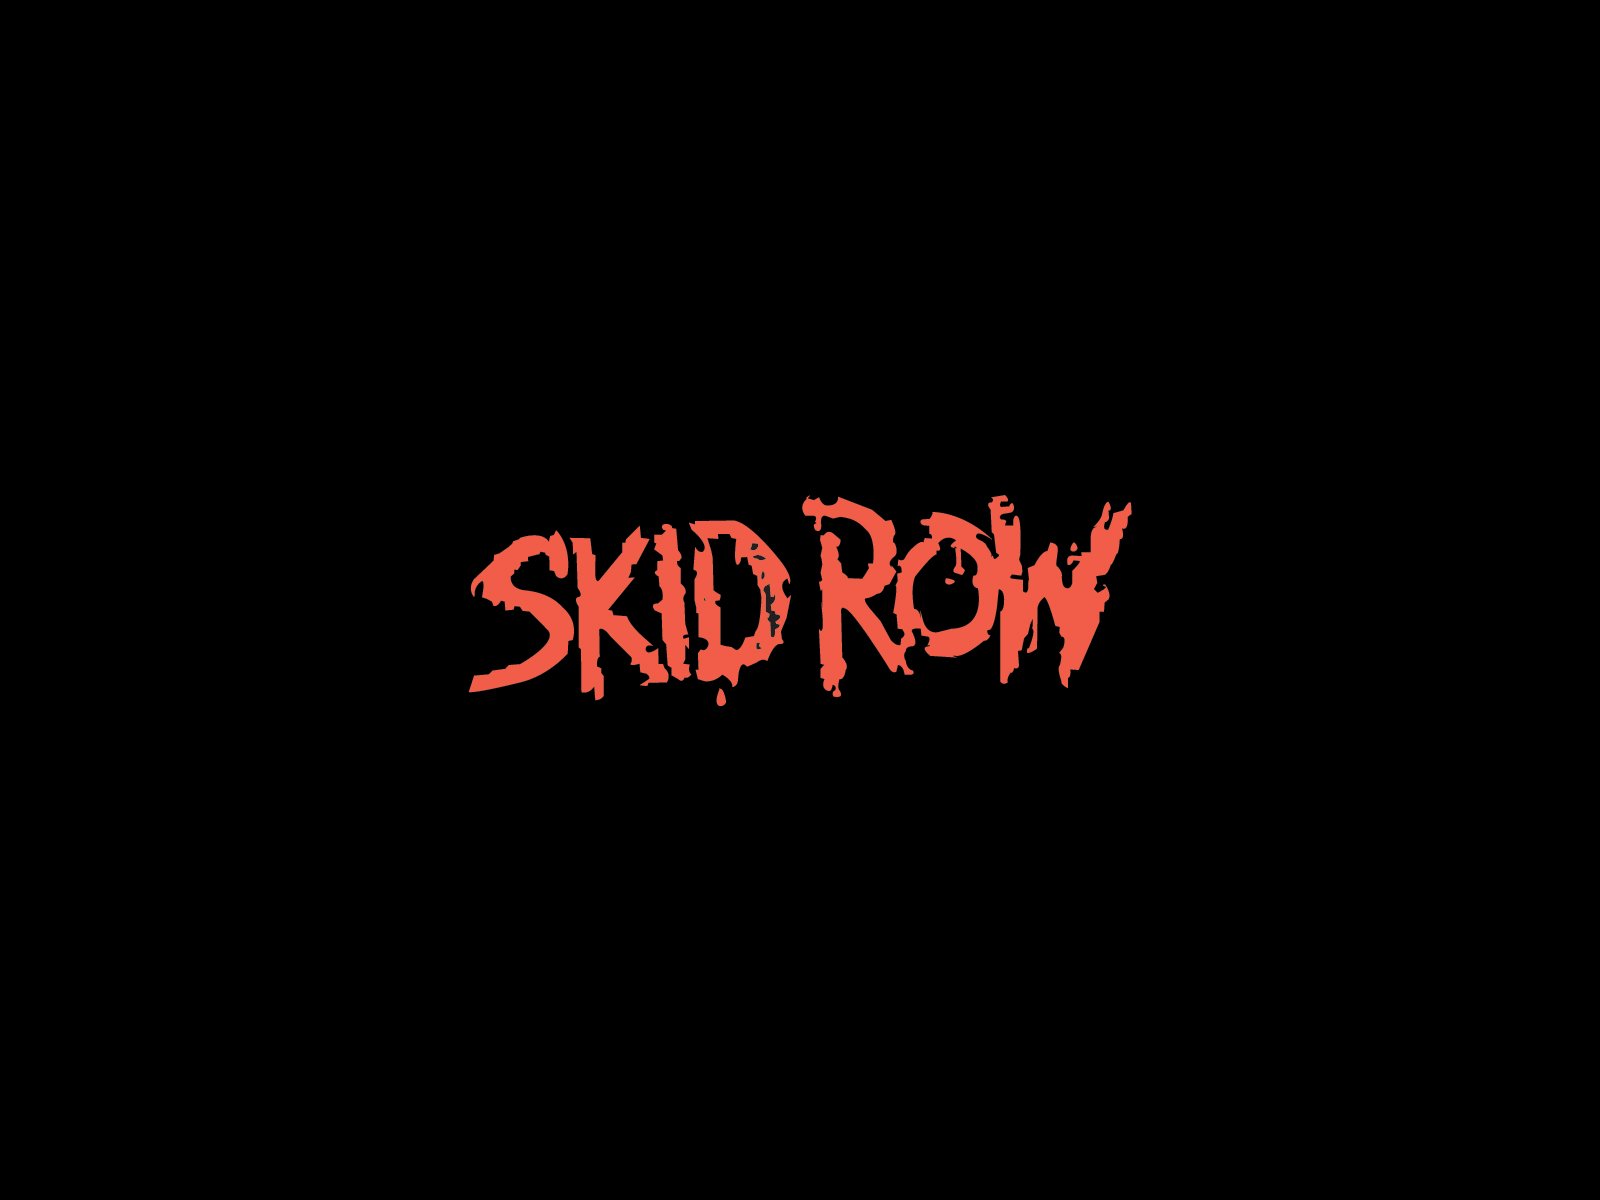 is itlegal to download stuff from skidrow